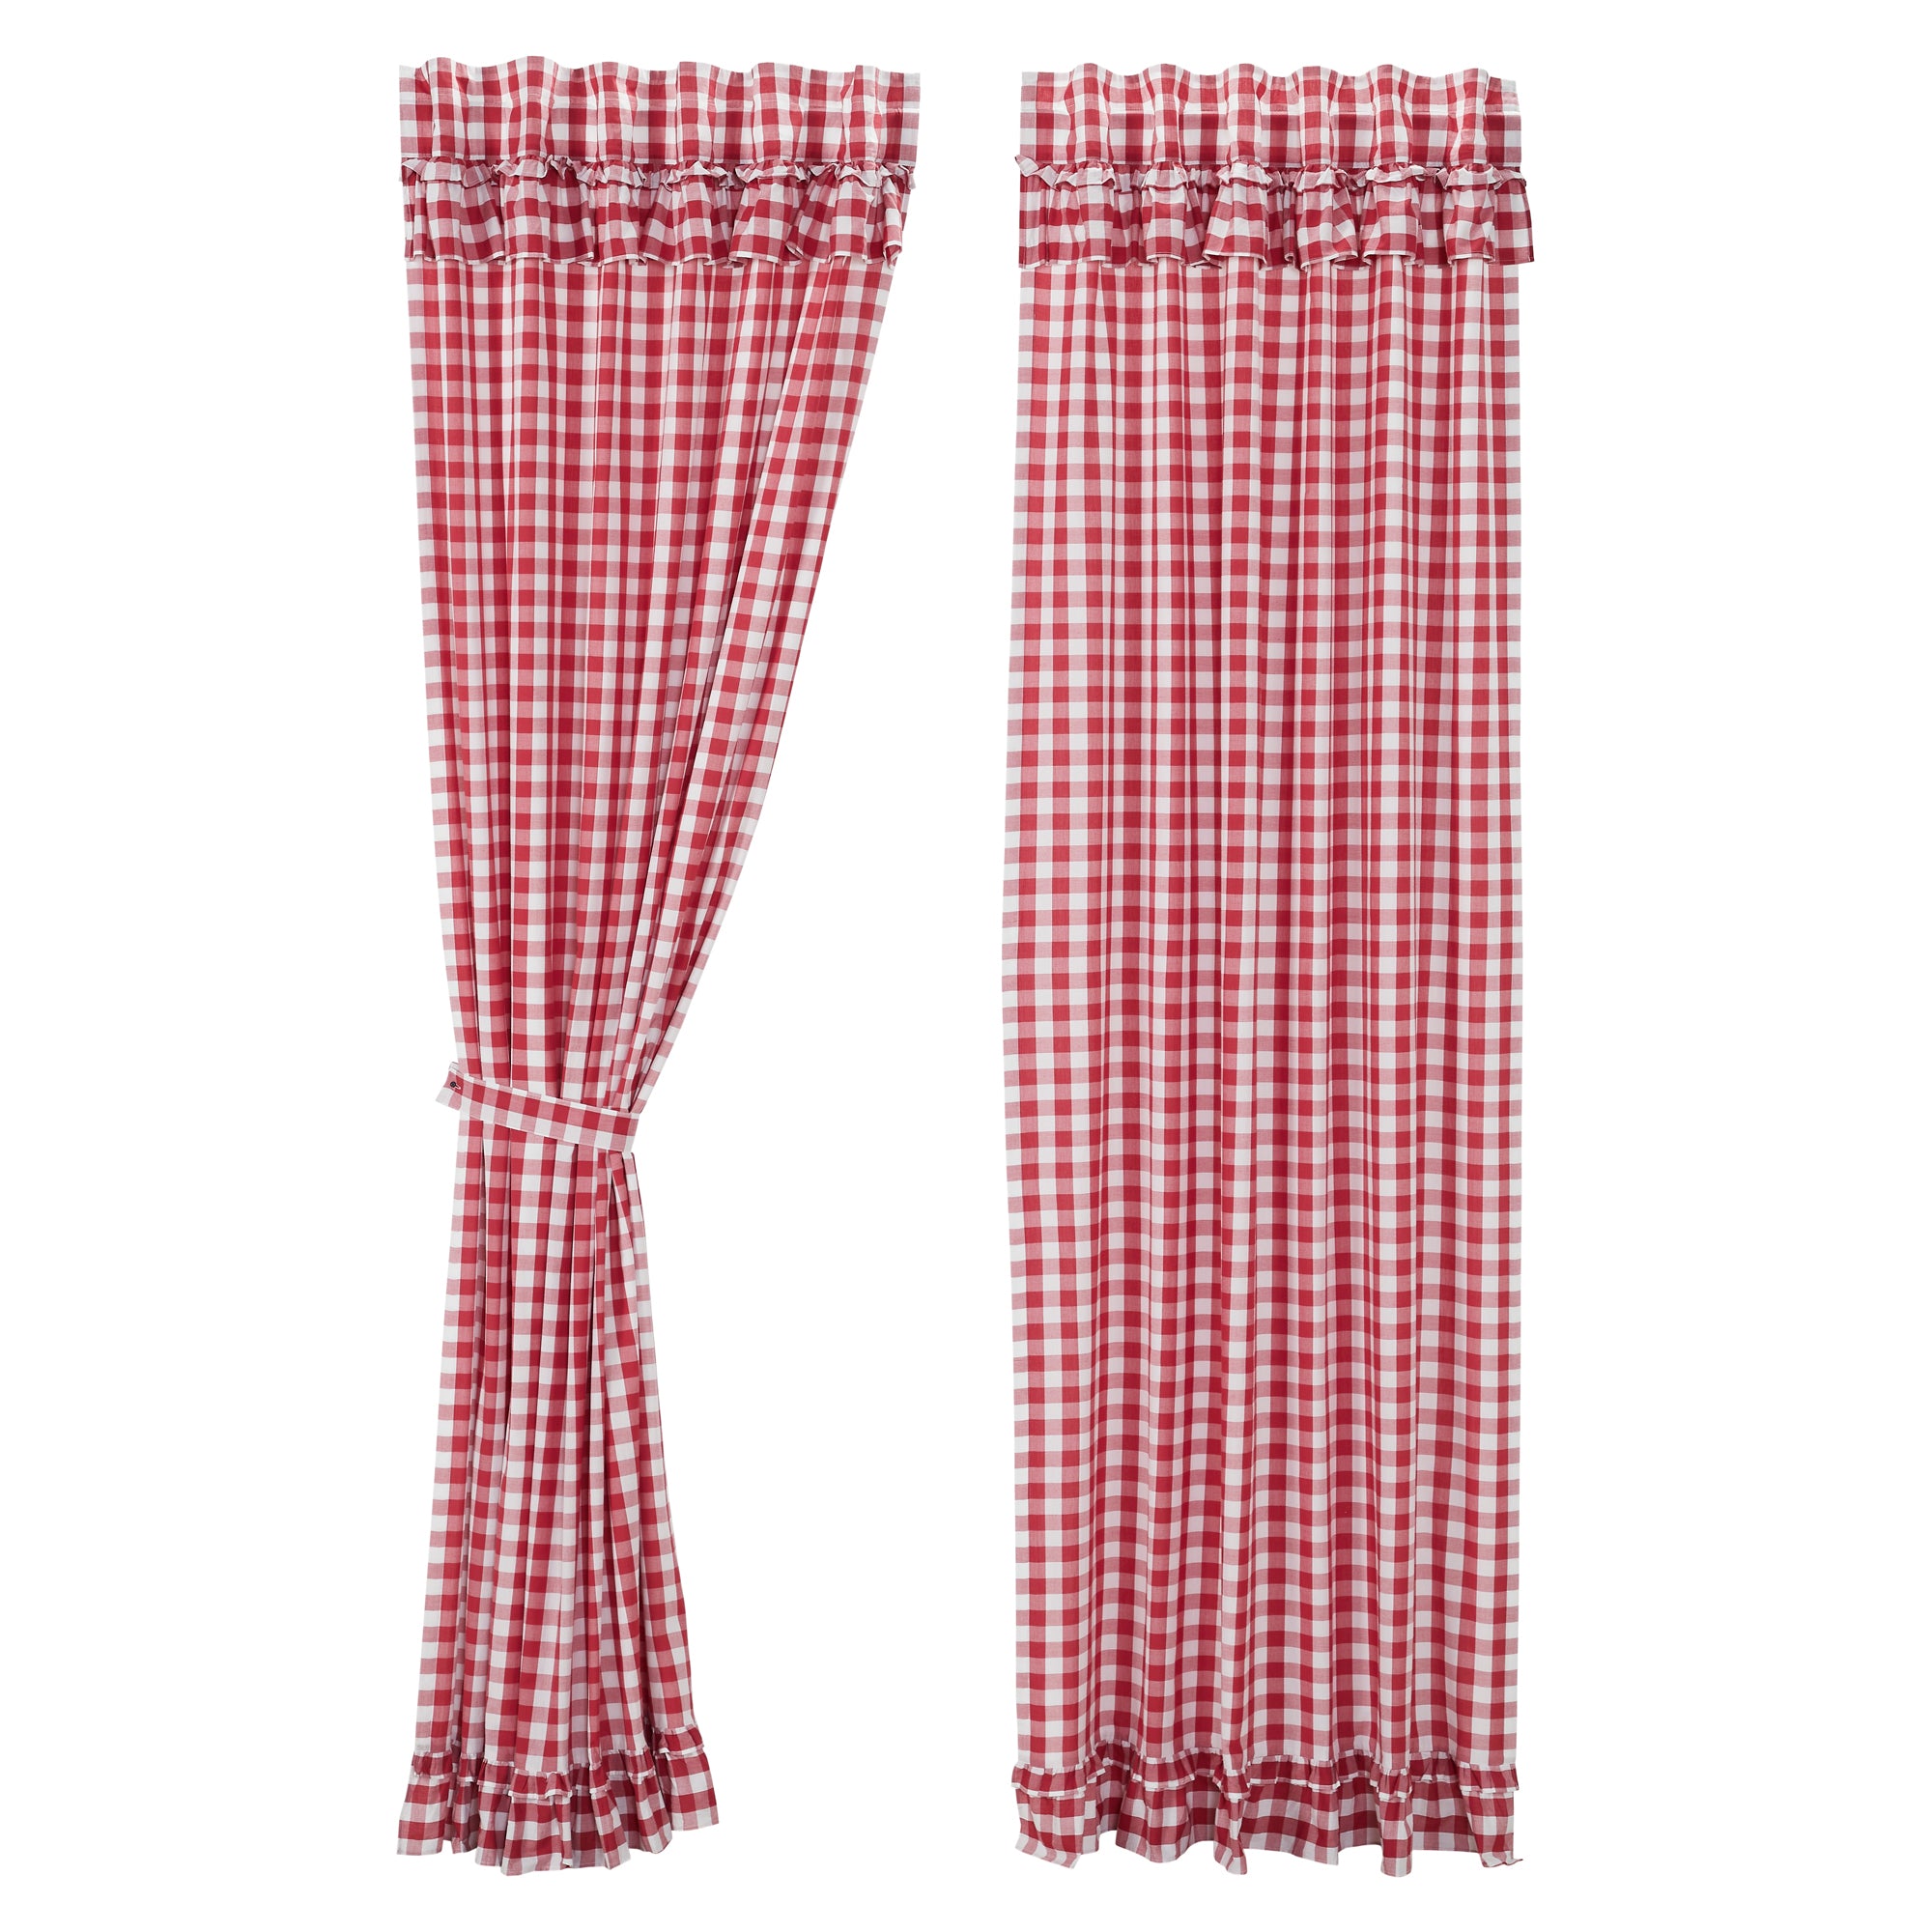 April & Olive Annie Buffalo Red Check Ruffled Panel Set of 2 96x50 By VHC Brands